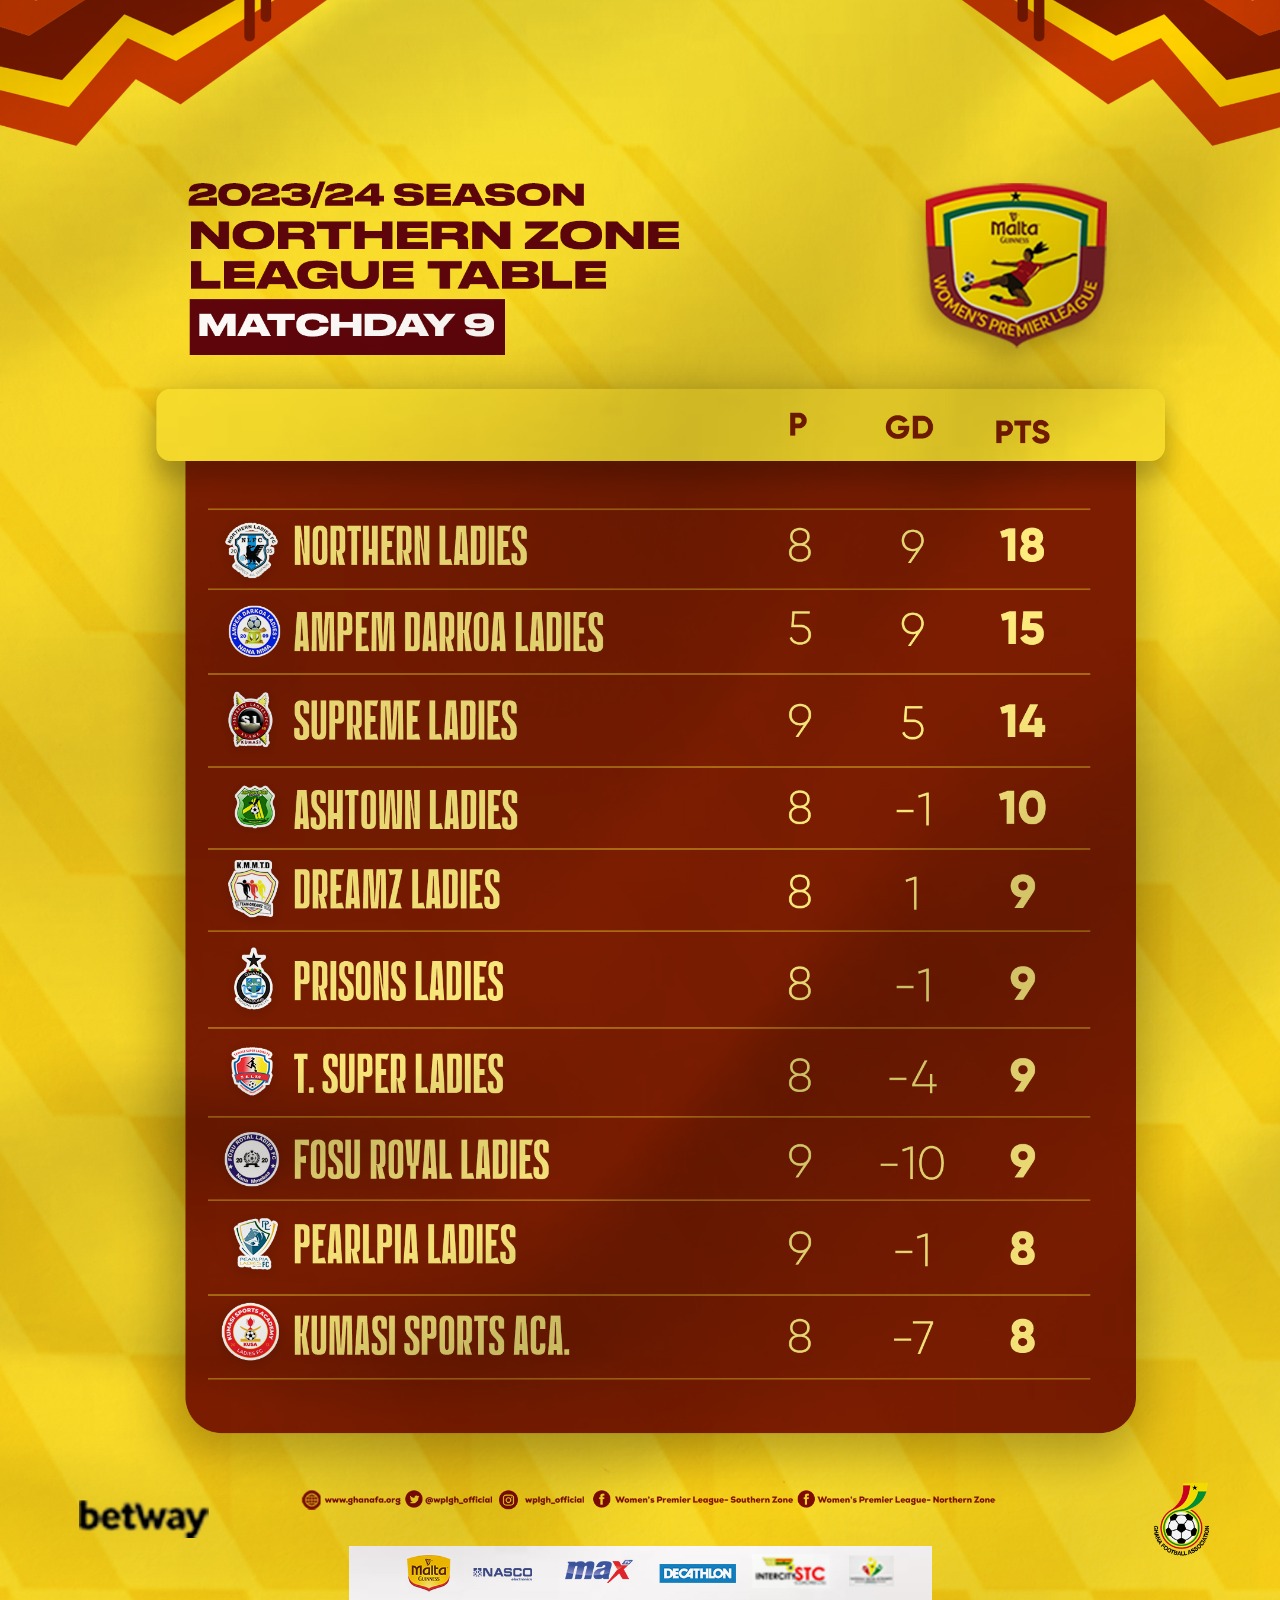 Northern Ladies lead League table in Northern Zone